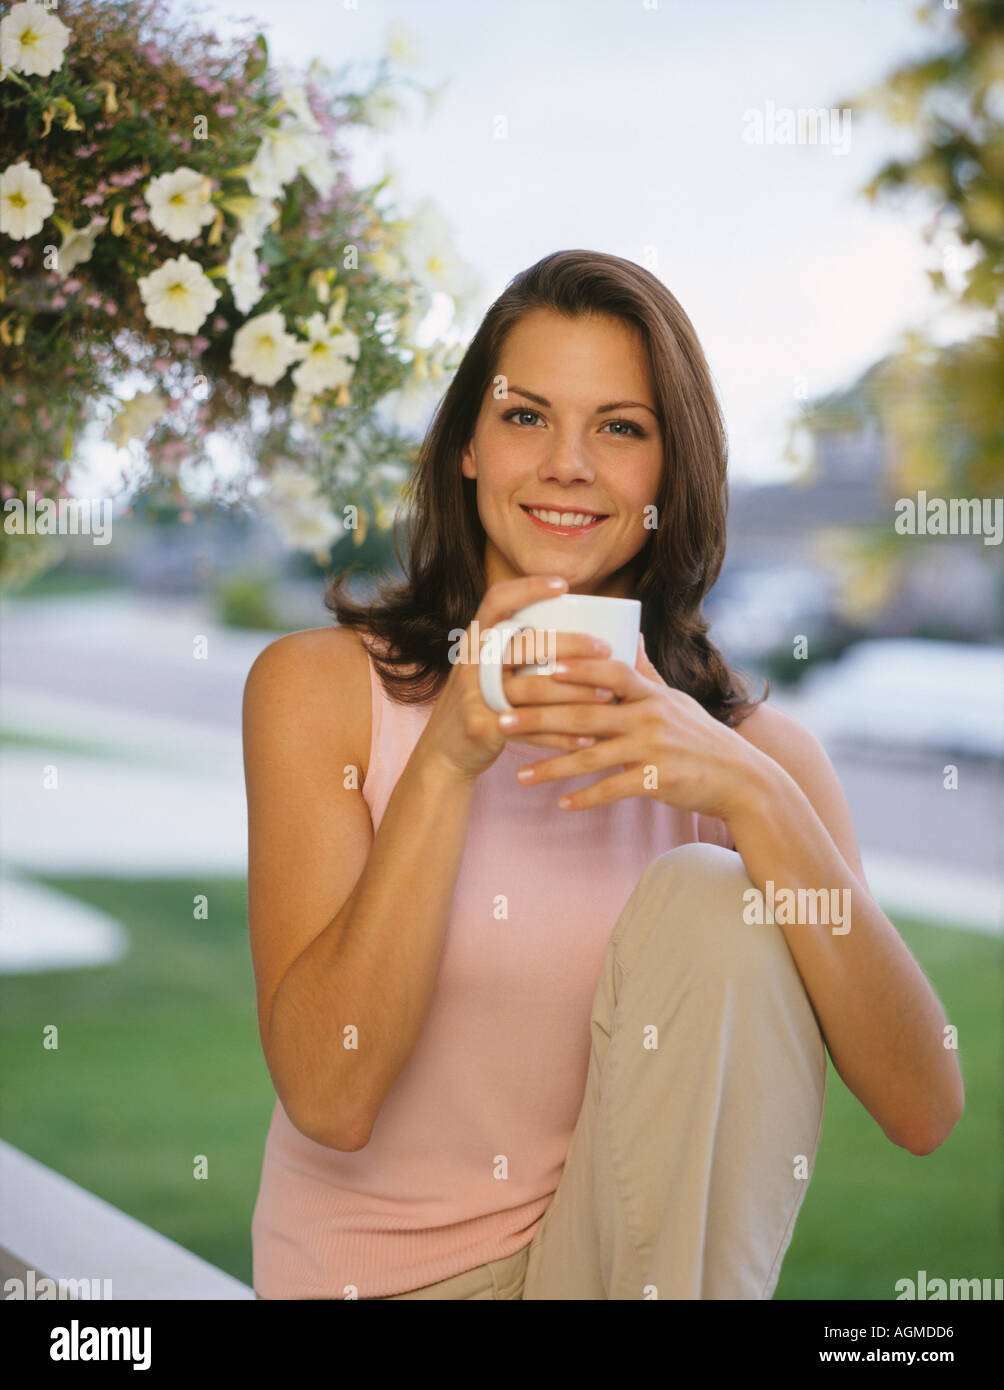 Young woman sitting on porch railing drinking hot beverage Stock Photo